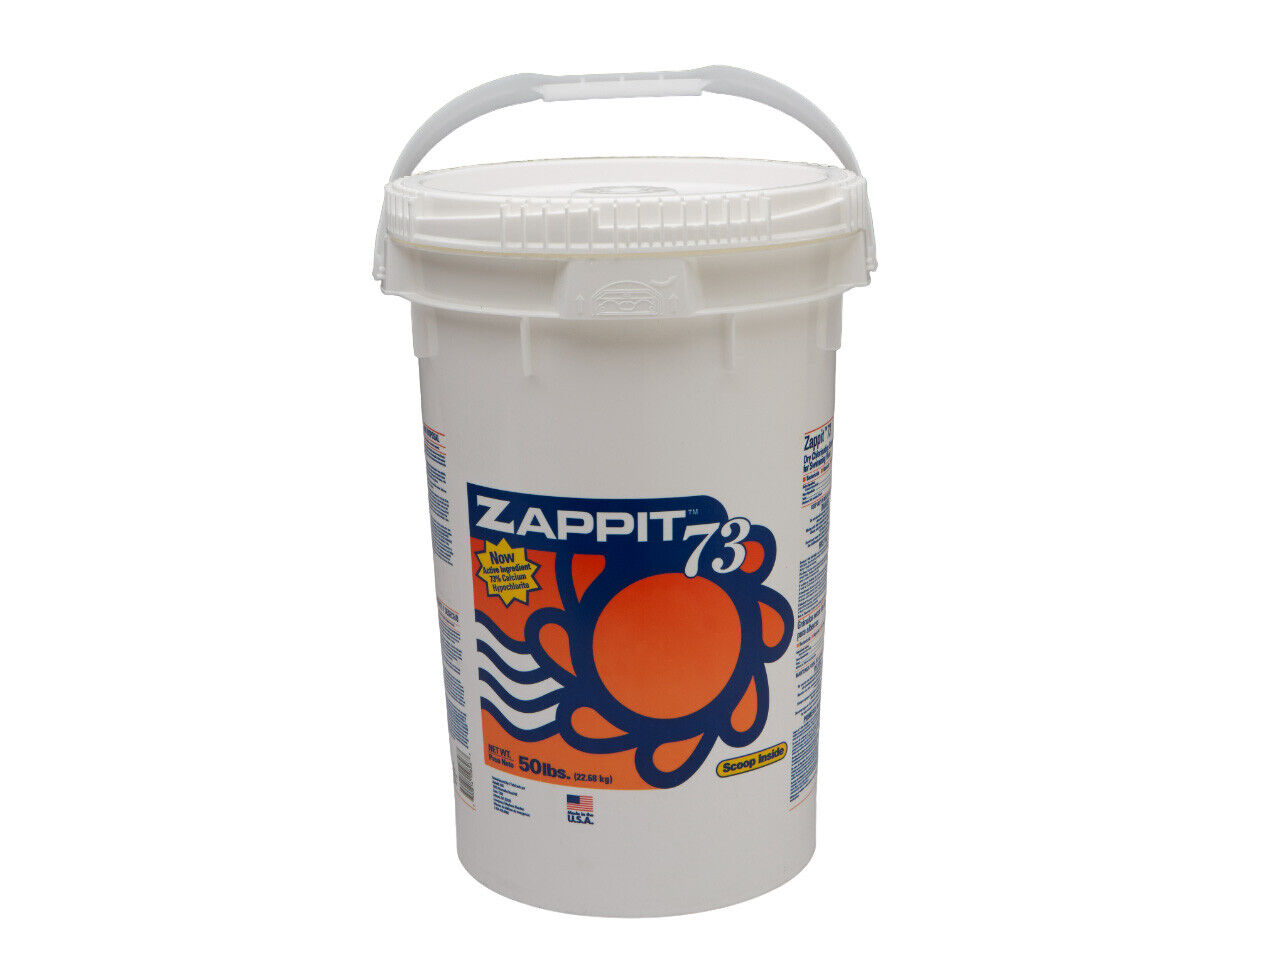 Zappit 73% Super Strength Pro Pool Shock 50 LB Bucket, 70% Available Chlorine